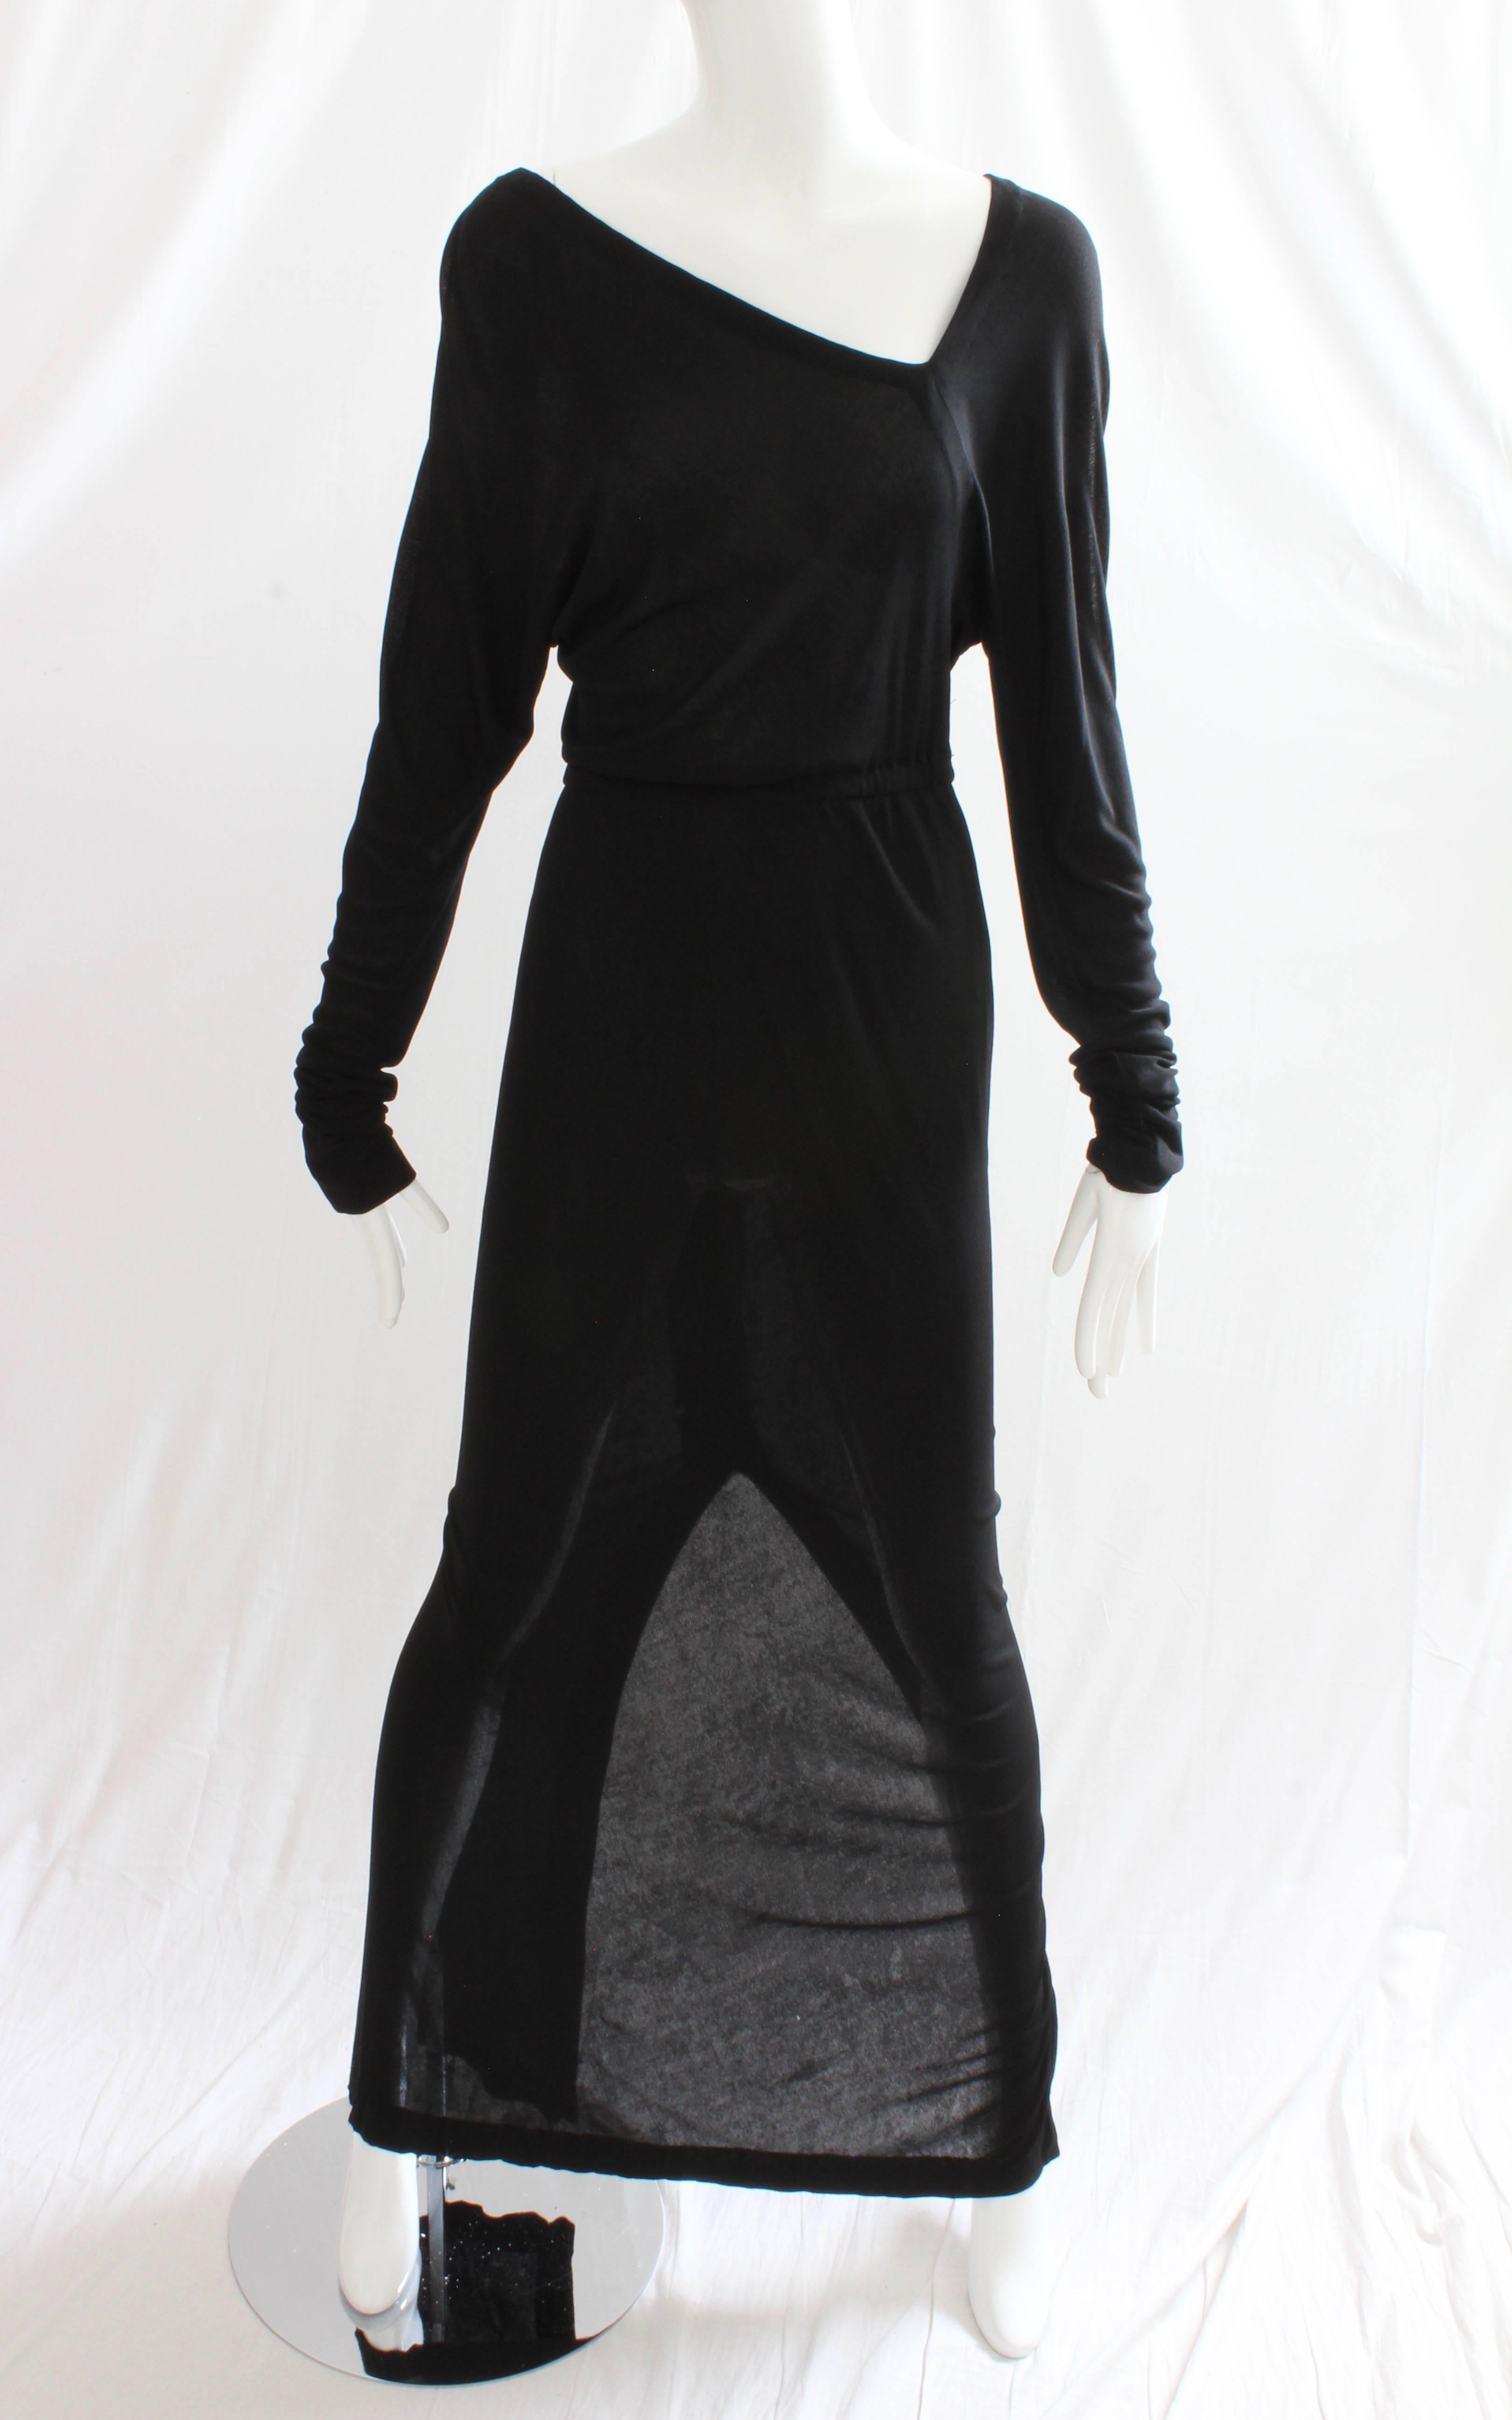 This long and sexy black silk jersey dress was made by HALSTON in 1975, and the same dress in purple can be seen at the Museum of Fine Arts in Boston collection (see image 10). In excellent shape for its 40+ years of age, we note two small repairs